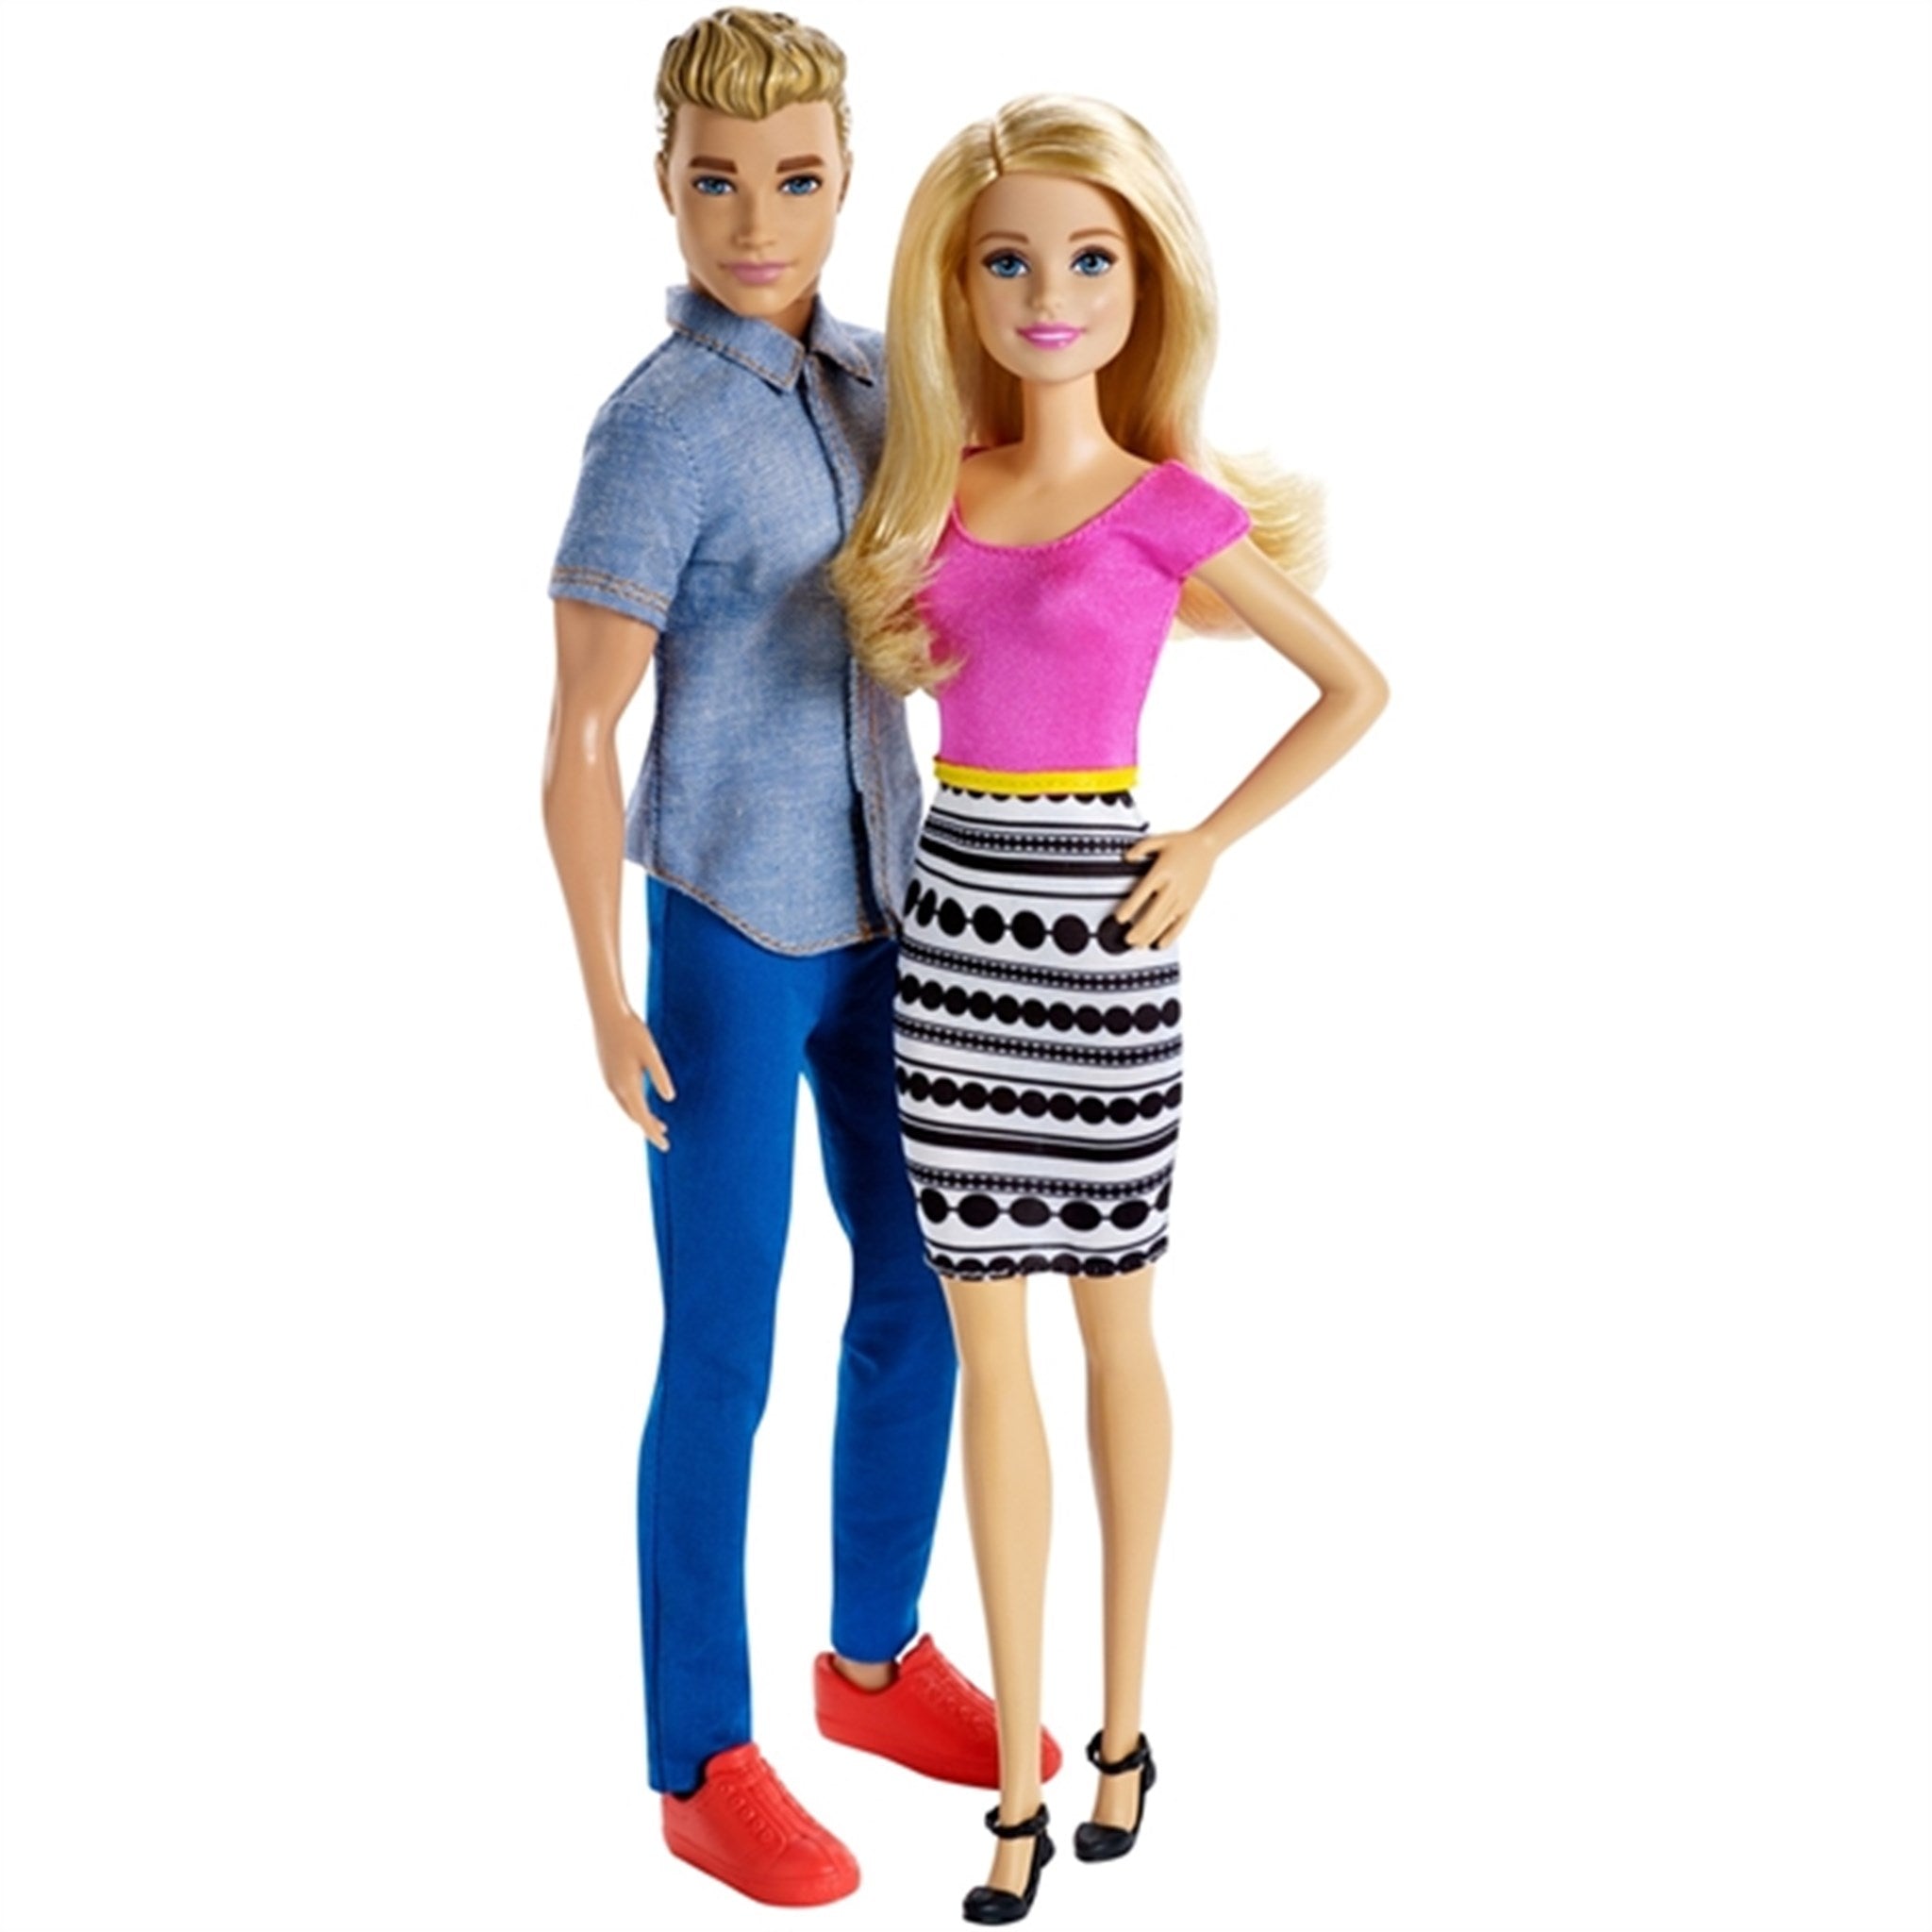 The Barbie washing machine comes with Ken, not Barbie : r